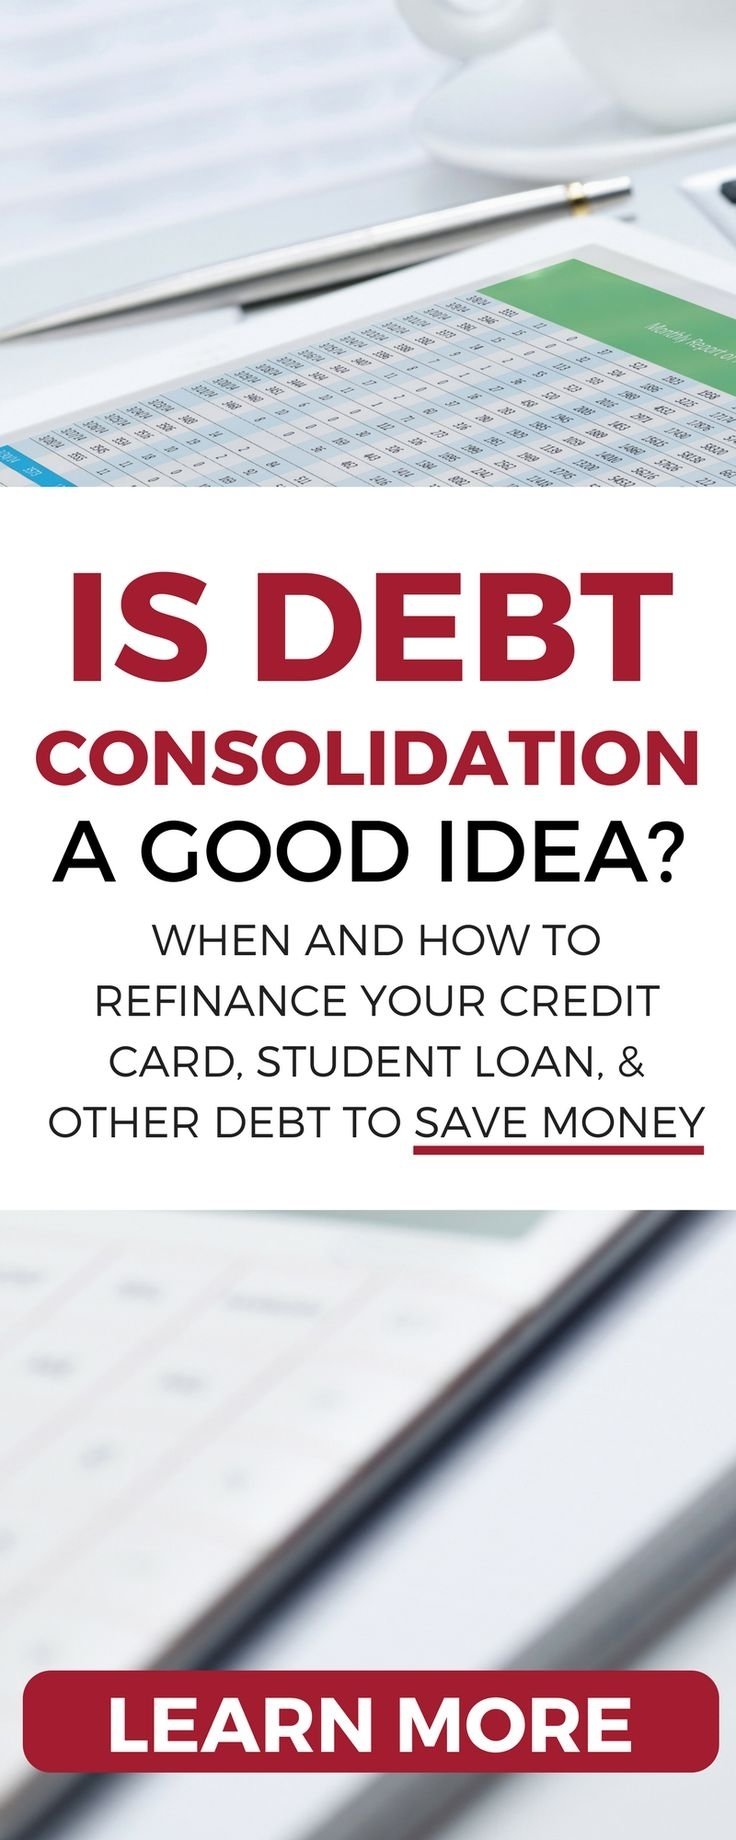 10 Fantastic Is Debt Consolidation A Good Idea personal loans for debt consolidation 1 2022